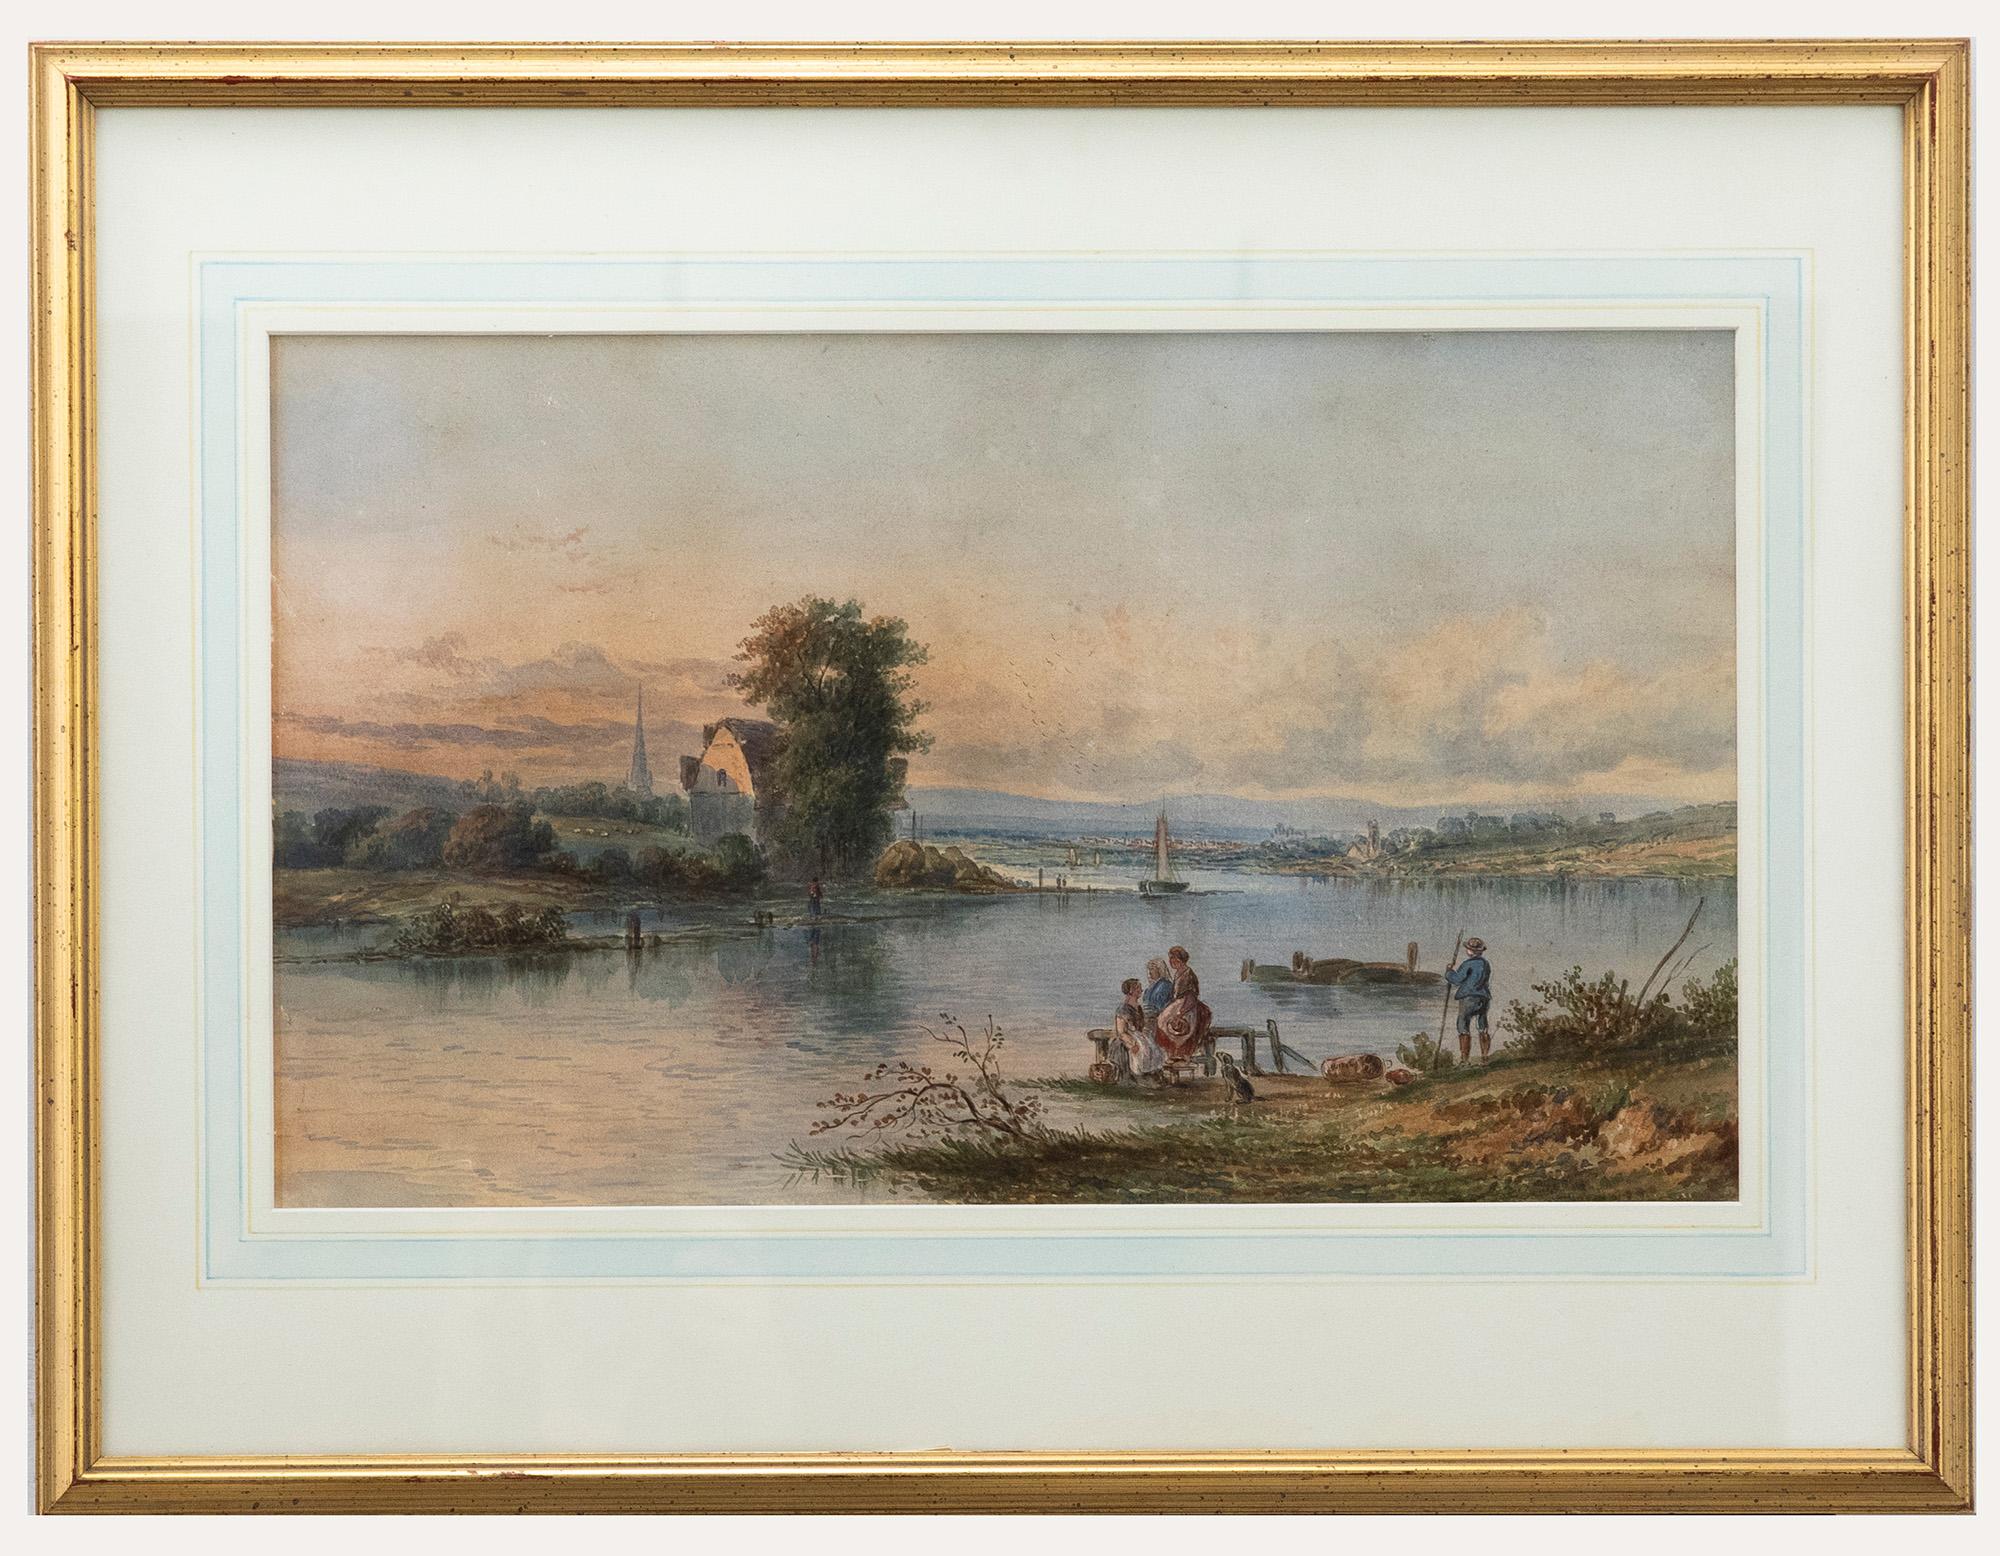 Unknown Landscape Art - Framed English School Mid 19th Century Watercolour - Meeting by the River